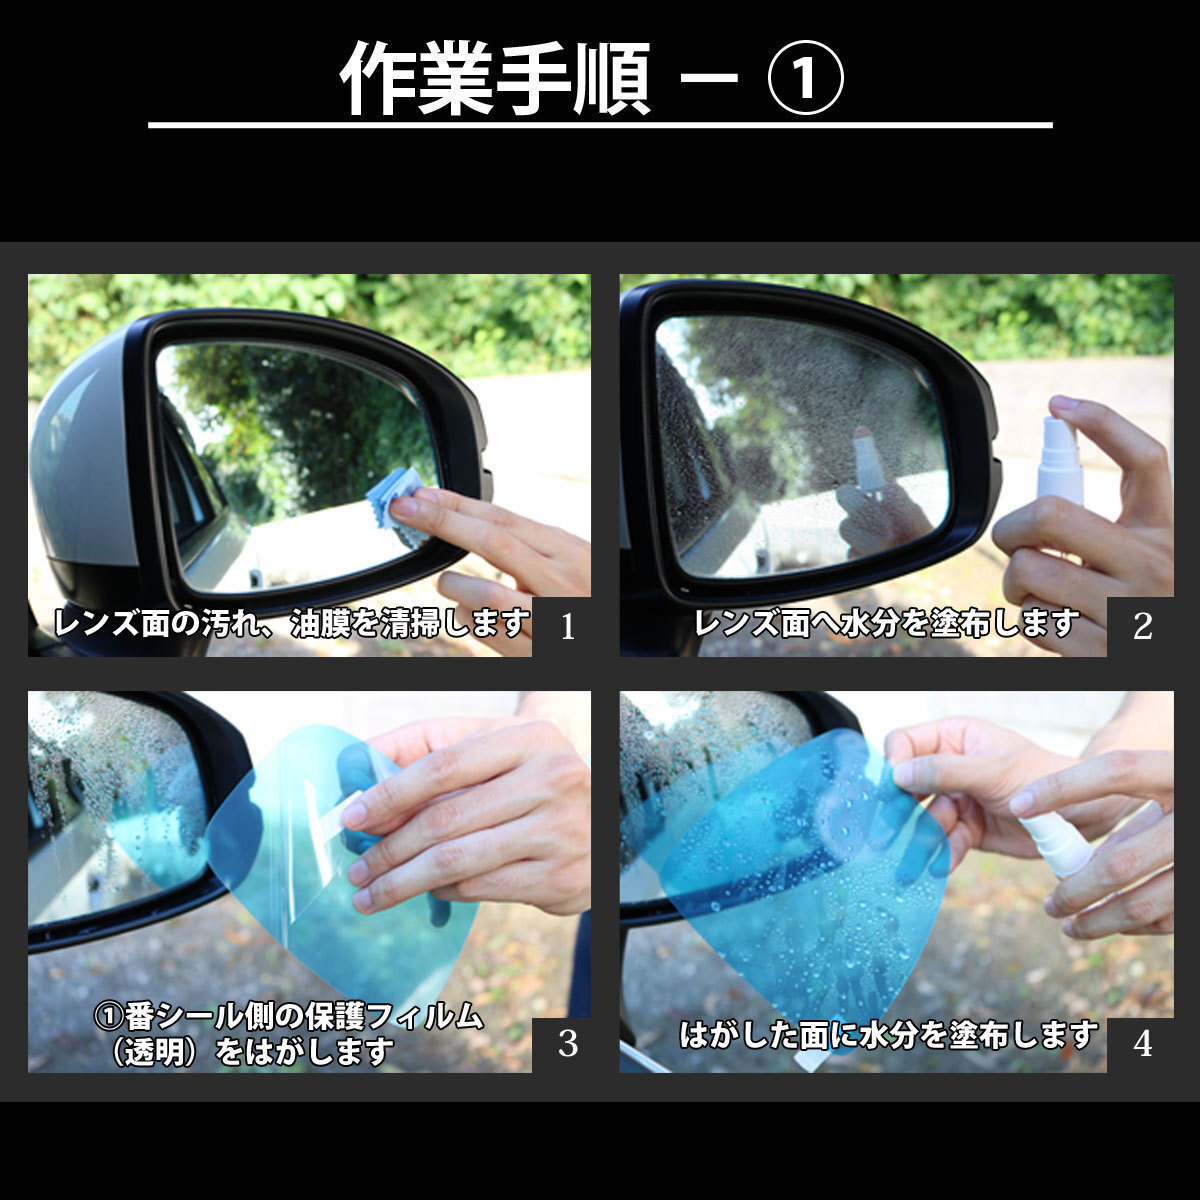  car make exclusive use VW New Beetle 99/06~03/02 exclusive use water-repellent door mirror film left right set water-repellent effect 6 months shipping deadline 18 hour 